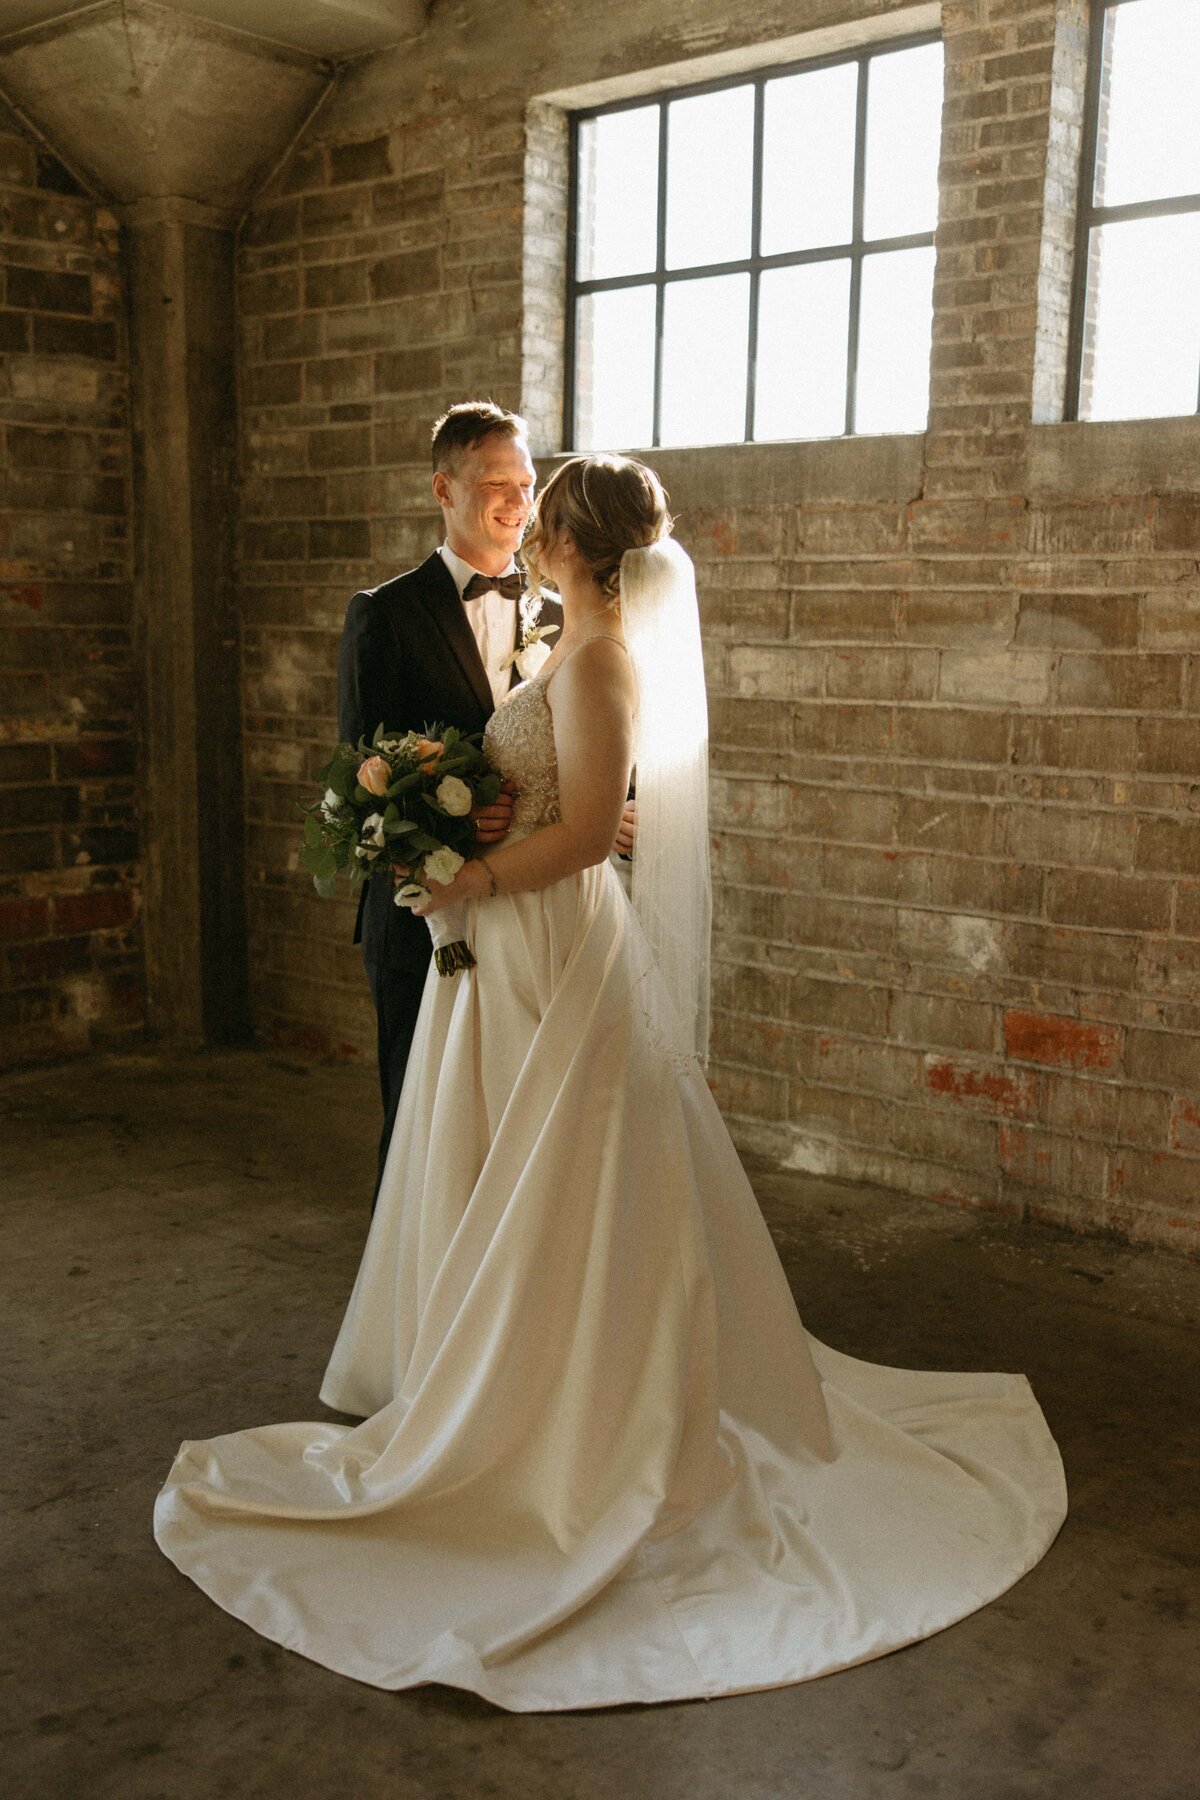 A bride and groom smiling at each other in a sunlit, rustic brick room, the bride holding a bouquet while wearing an elegant white dress with a long train, perfectly arranged by their wedding coordinator in